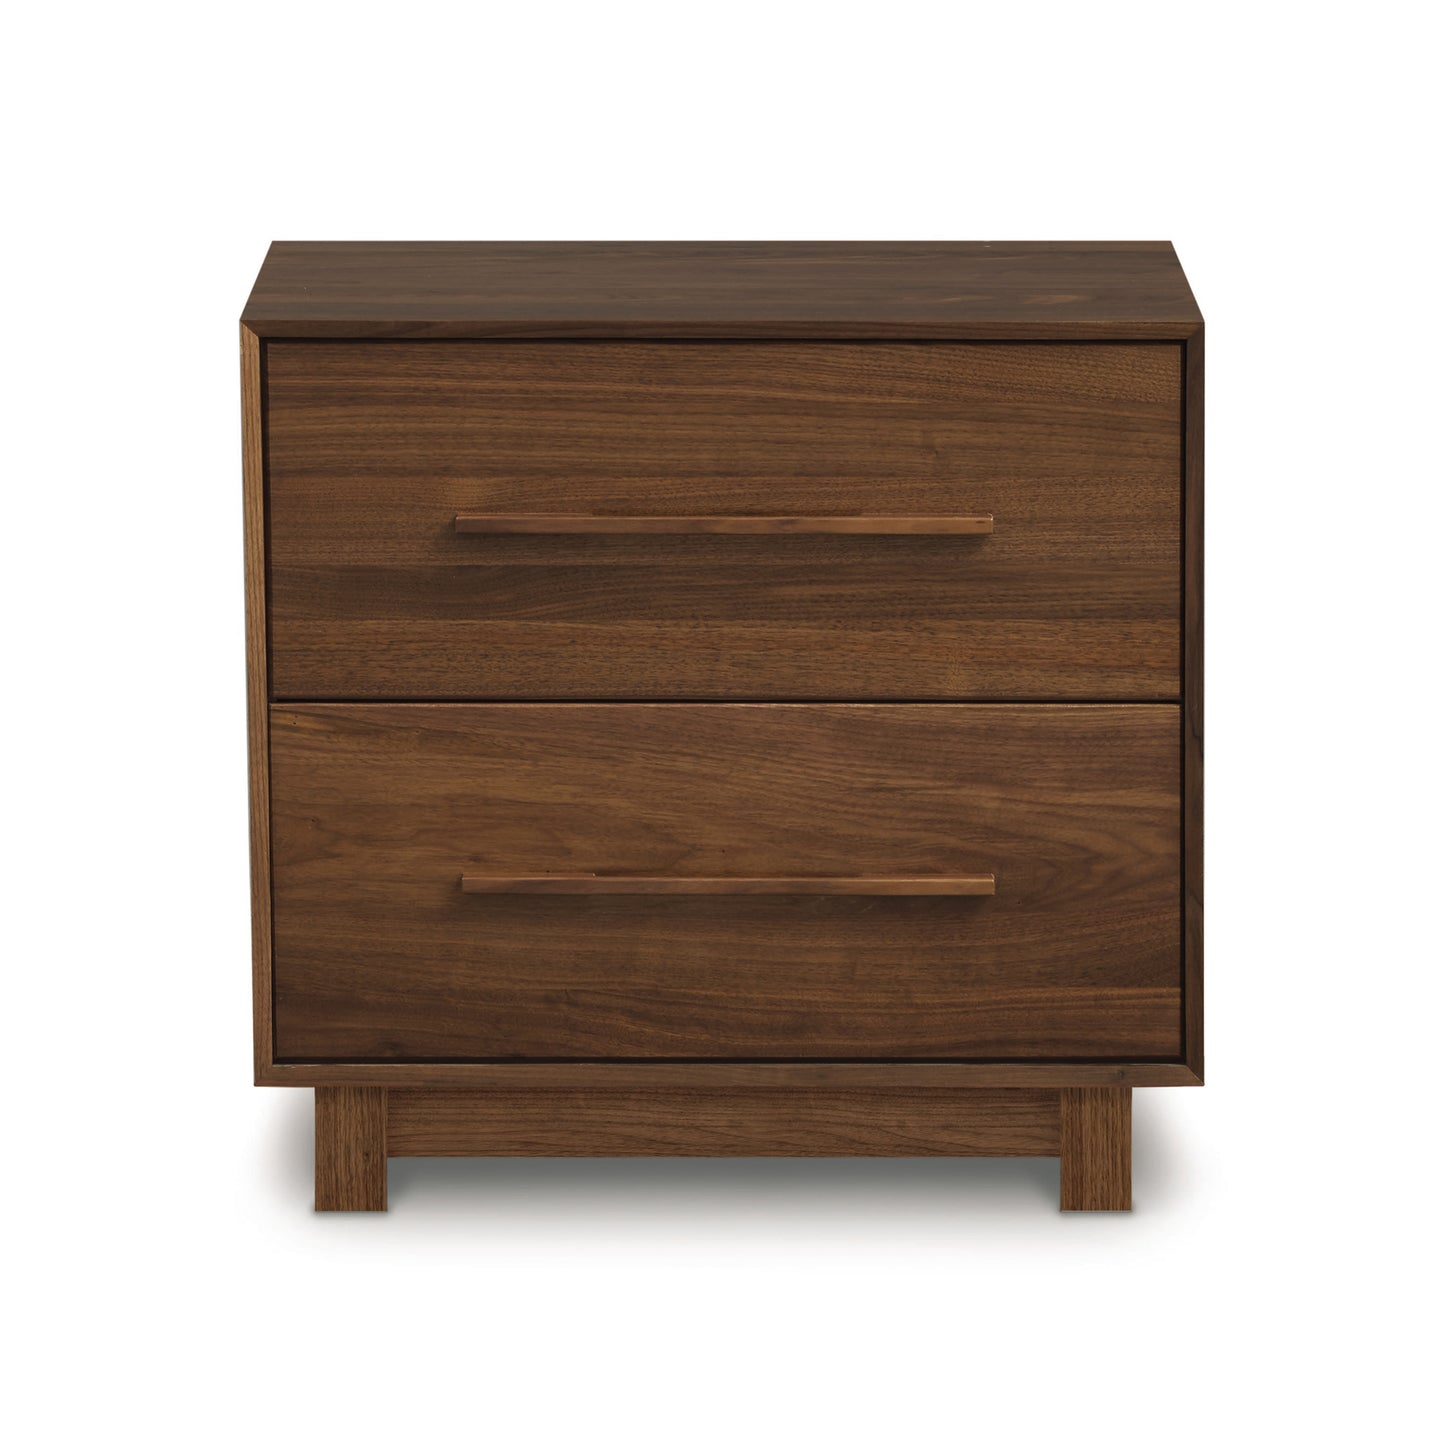 A mid-century modern Sloane 2-Drawer Nightstand crafted from solid black American walnut, isolated on a white background by Copeland Furniture.